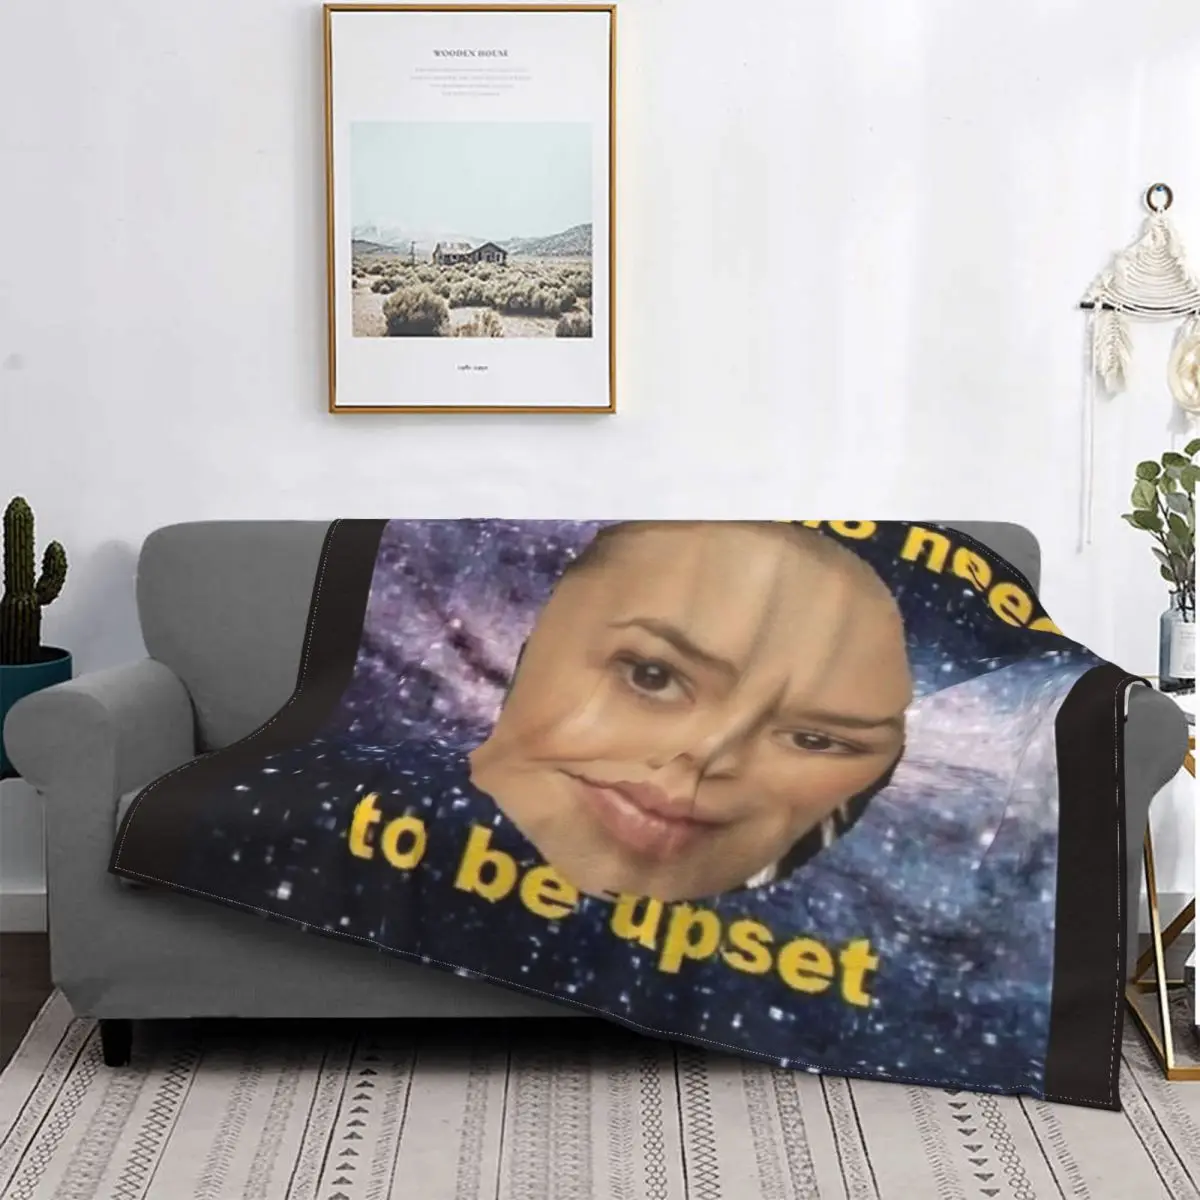 

Theres No Need To Be Upset Throw Blanket Customizable Comfortable Bedroom Multi Style